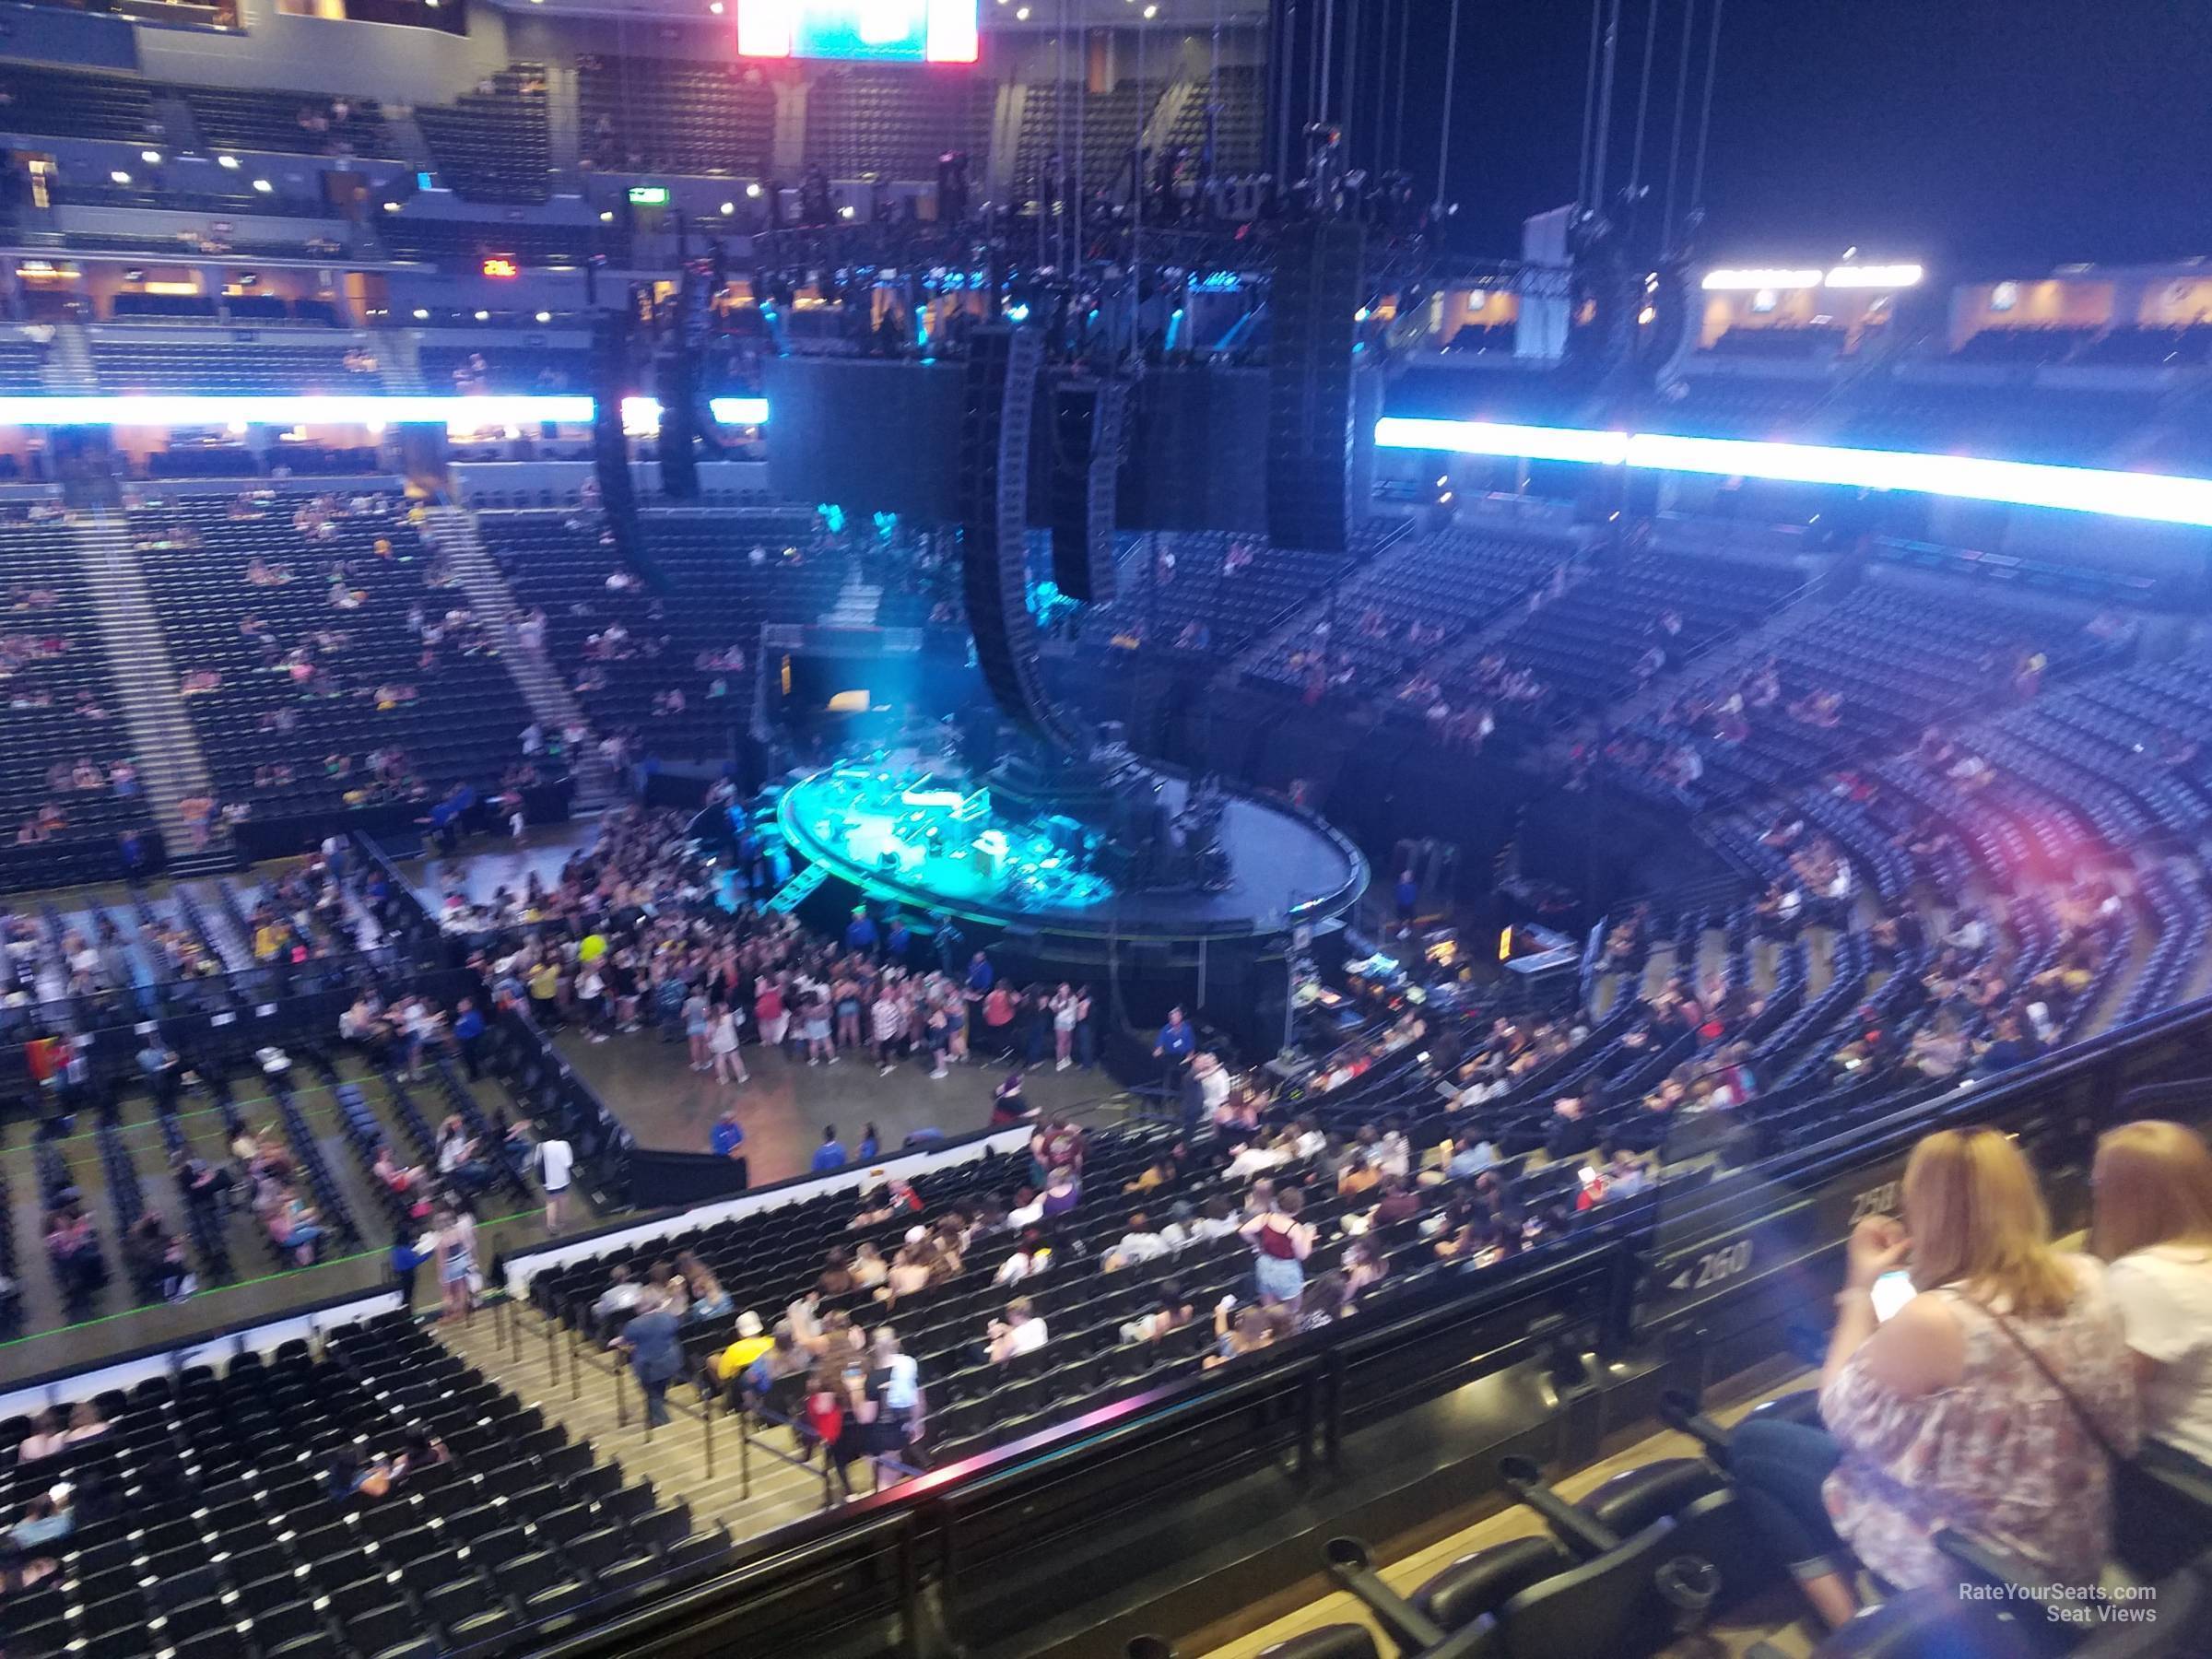 section 260, row 4 seat view  for concert - ball arena